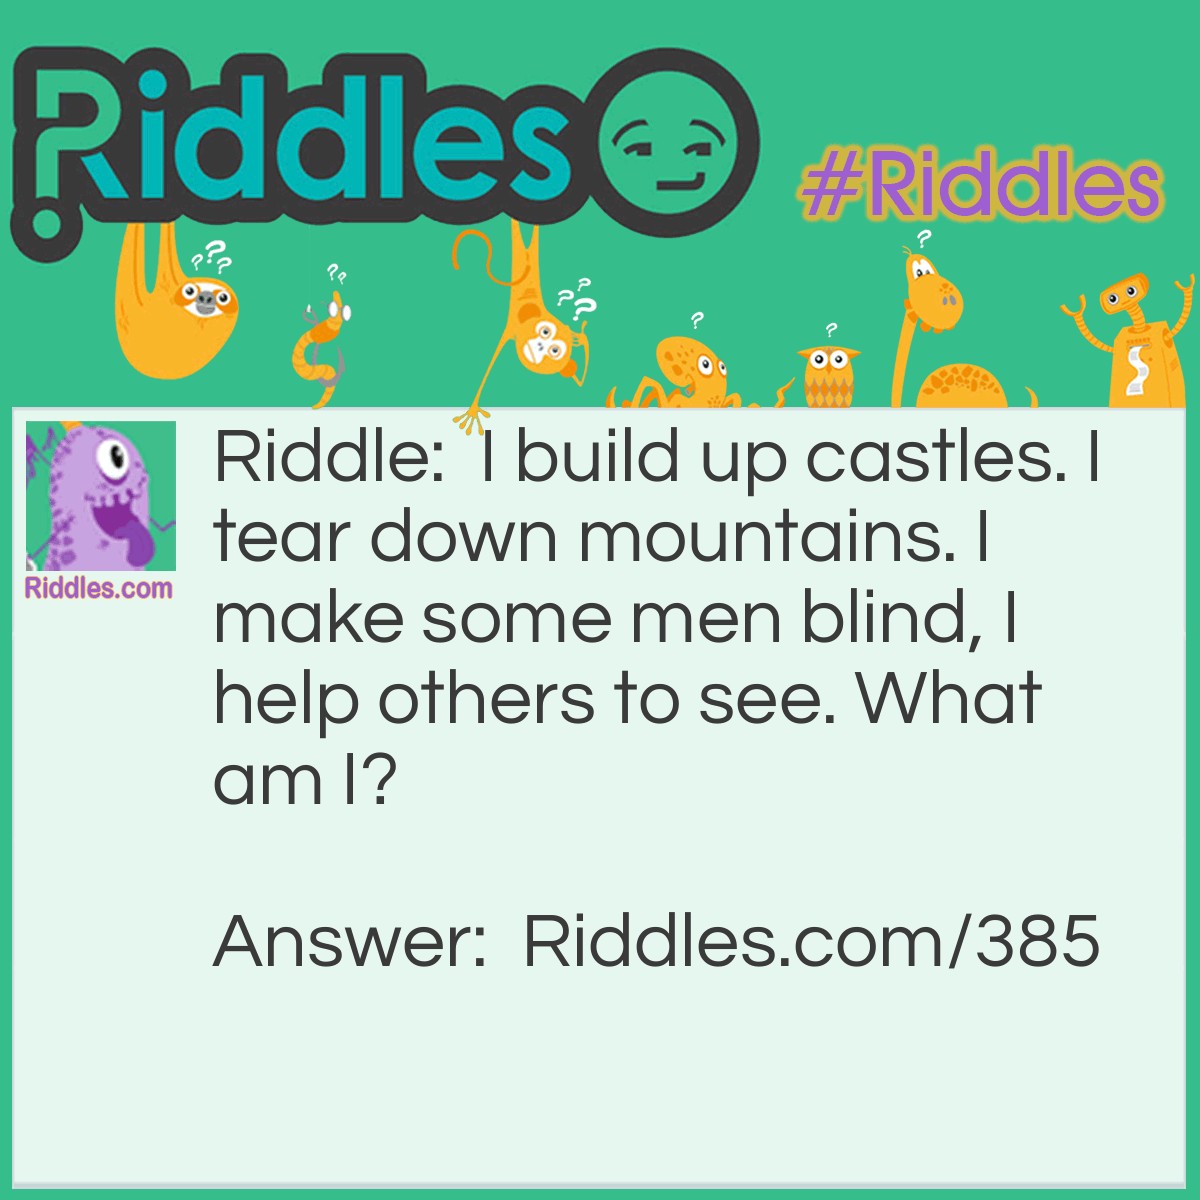 Riddle: I build up castles. I tear down mountains. I make some men blind, I help others to see. What am I? Answer: Sand.